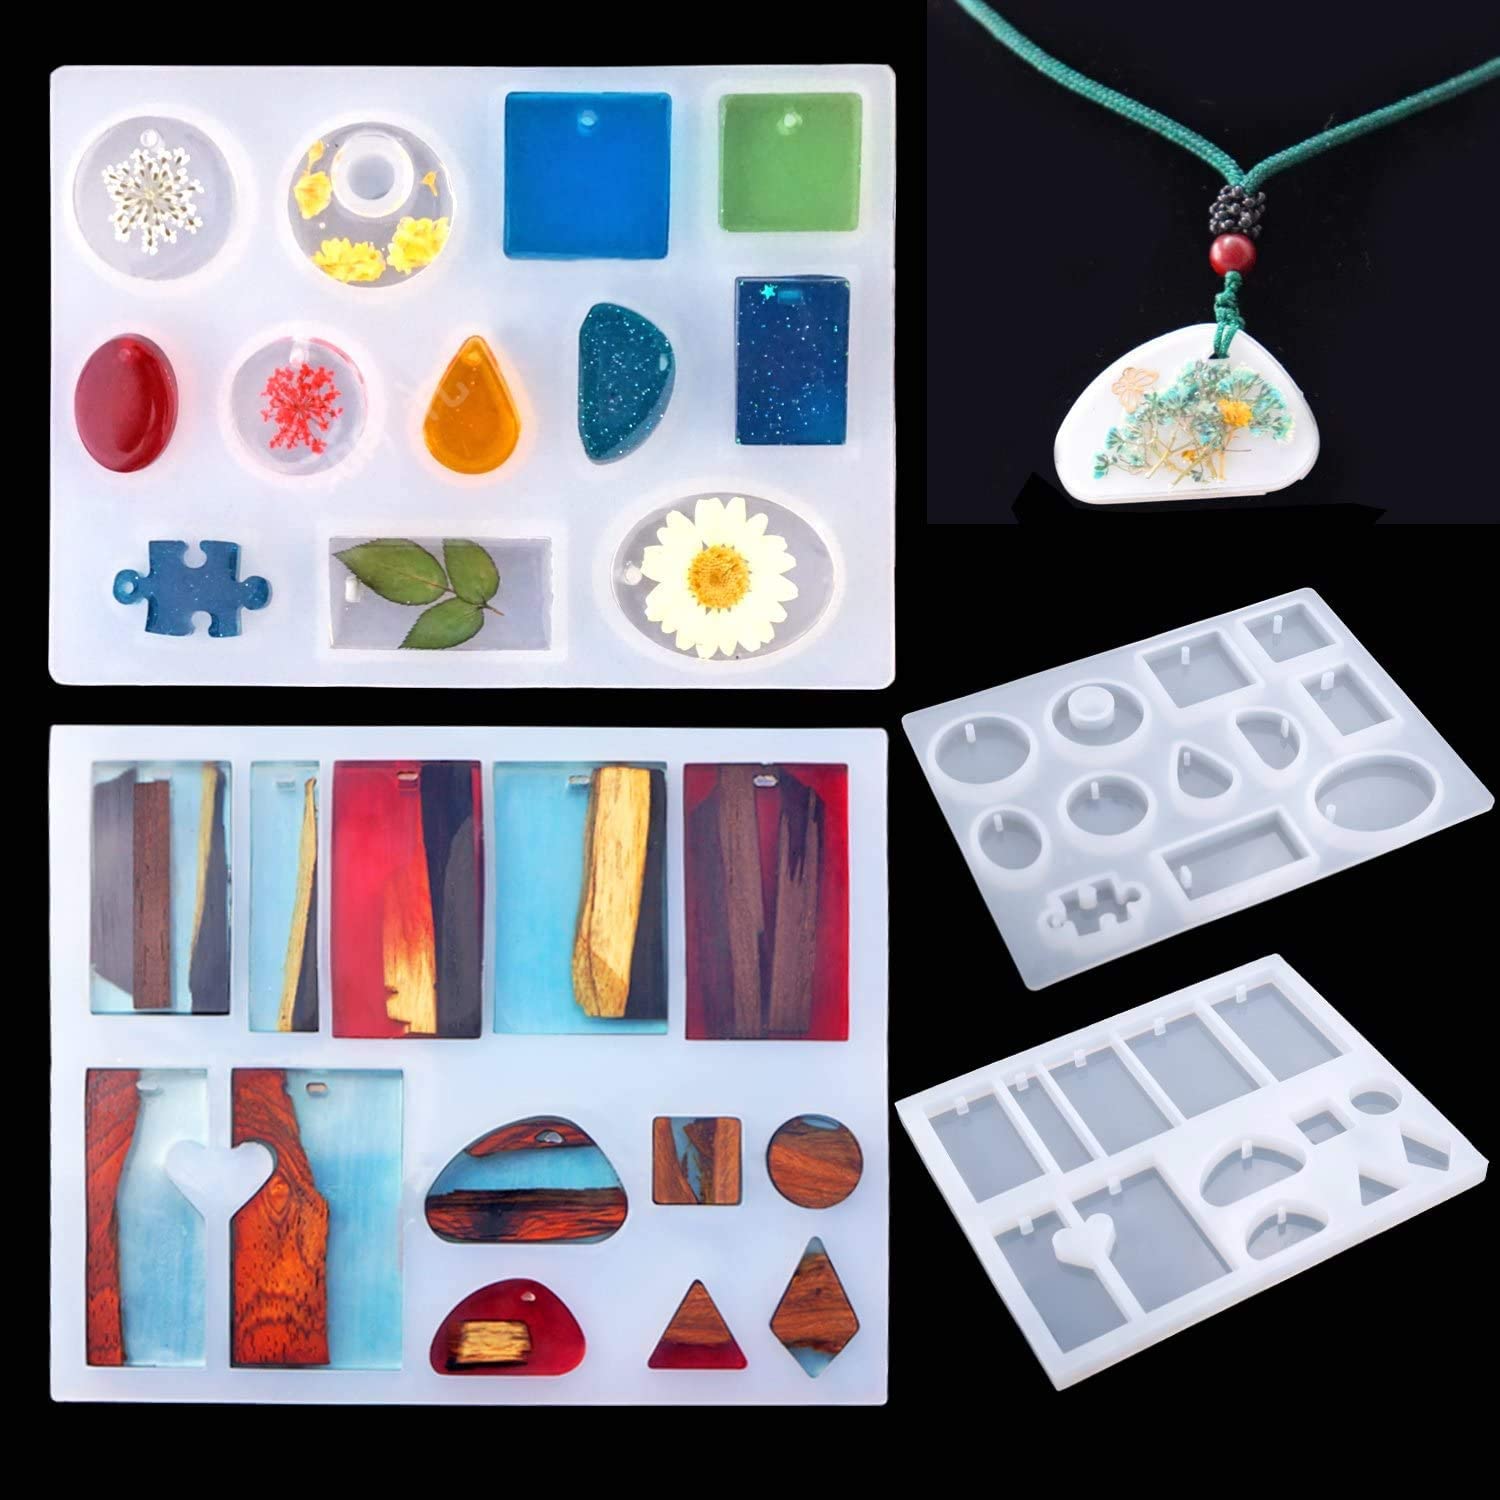 83 Pieces Silicone Casting Resin Jewelry Molds and Tools Set with A Black  Storage Bag for DIY Jewelry Resin Craft Making 